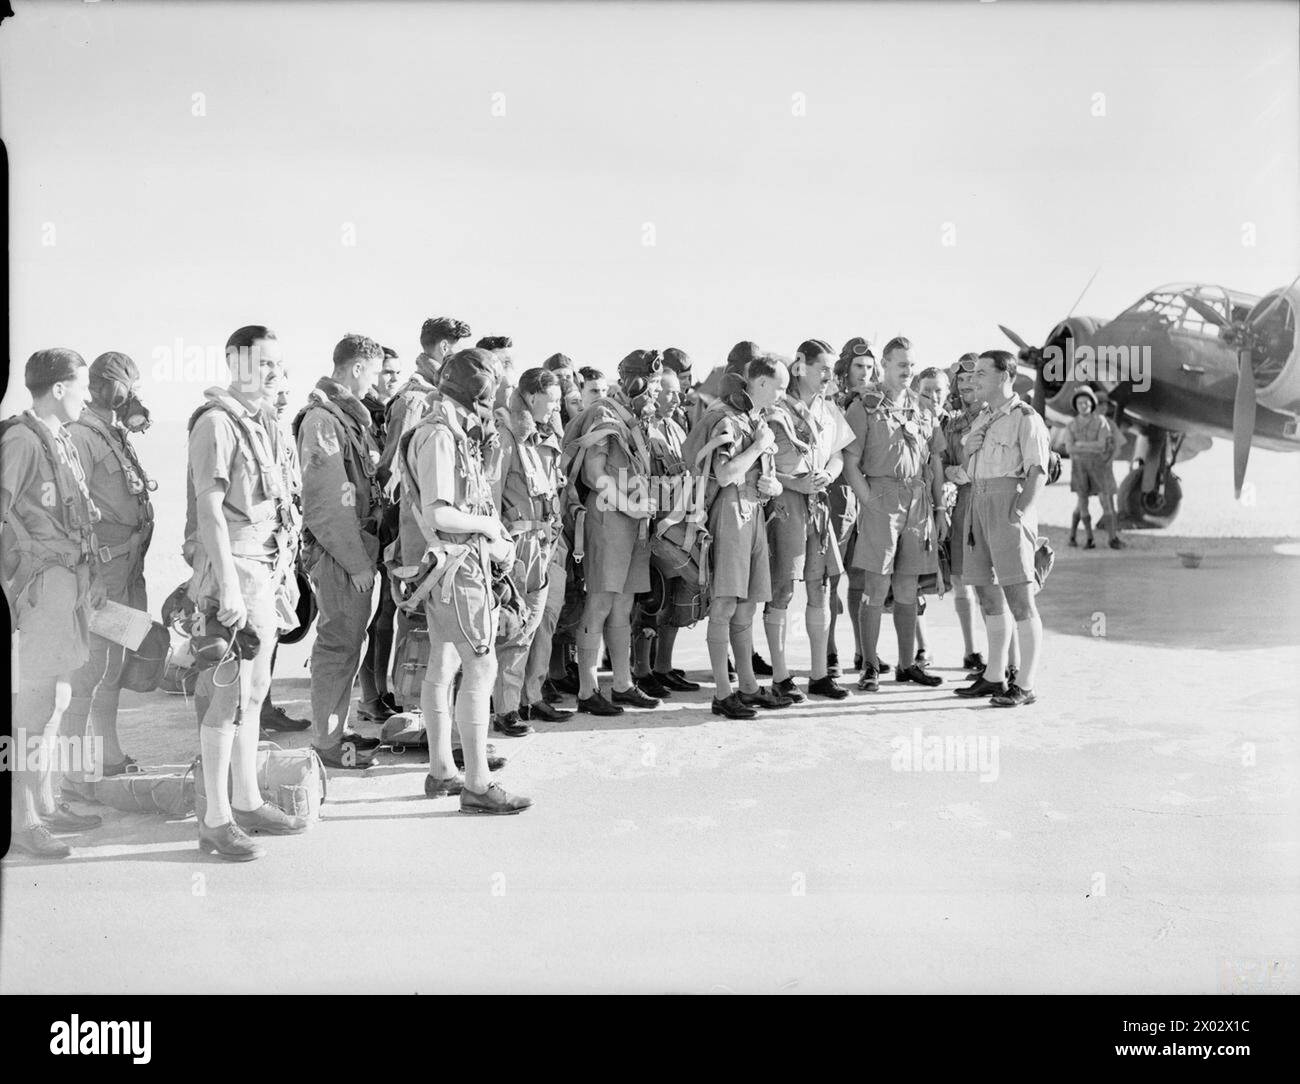 ROYAL AIR FORCE OPERATIONS IN THE MIDDLE EAST AND NORTH AFRICA, 1939-1943. - The Commanding Officer of No. 84 Squadron RAF briefs his aircrew before a training sortie at Shaibah, Iraq  Royal Air Force, Royal Air Force Regiment, Sqdn, 84 Stock Photo